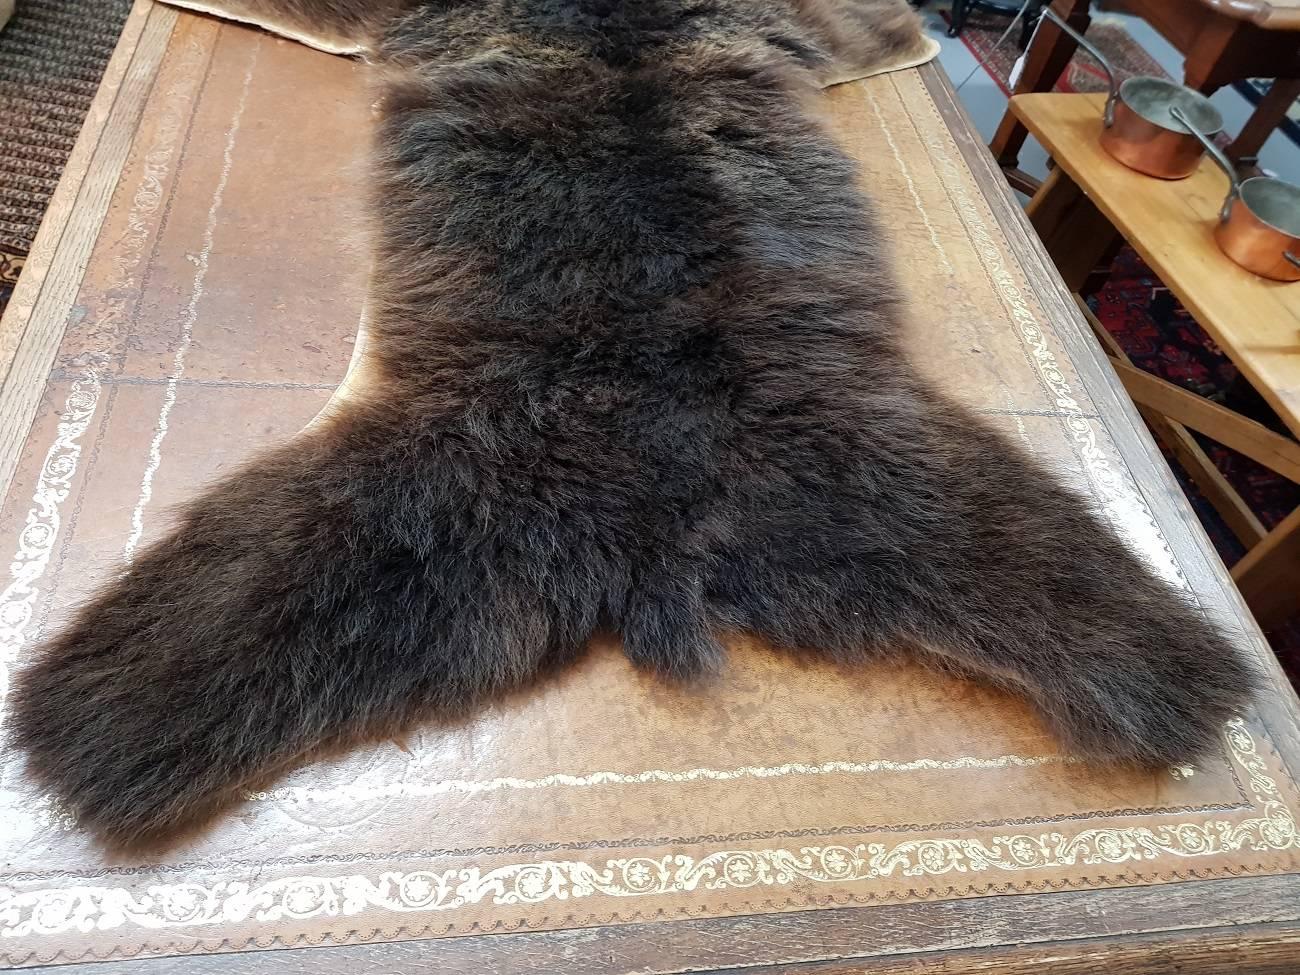 20th Century Vintage Wolverine Skin as a Floor Rug, from the 1960s-1970s